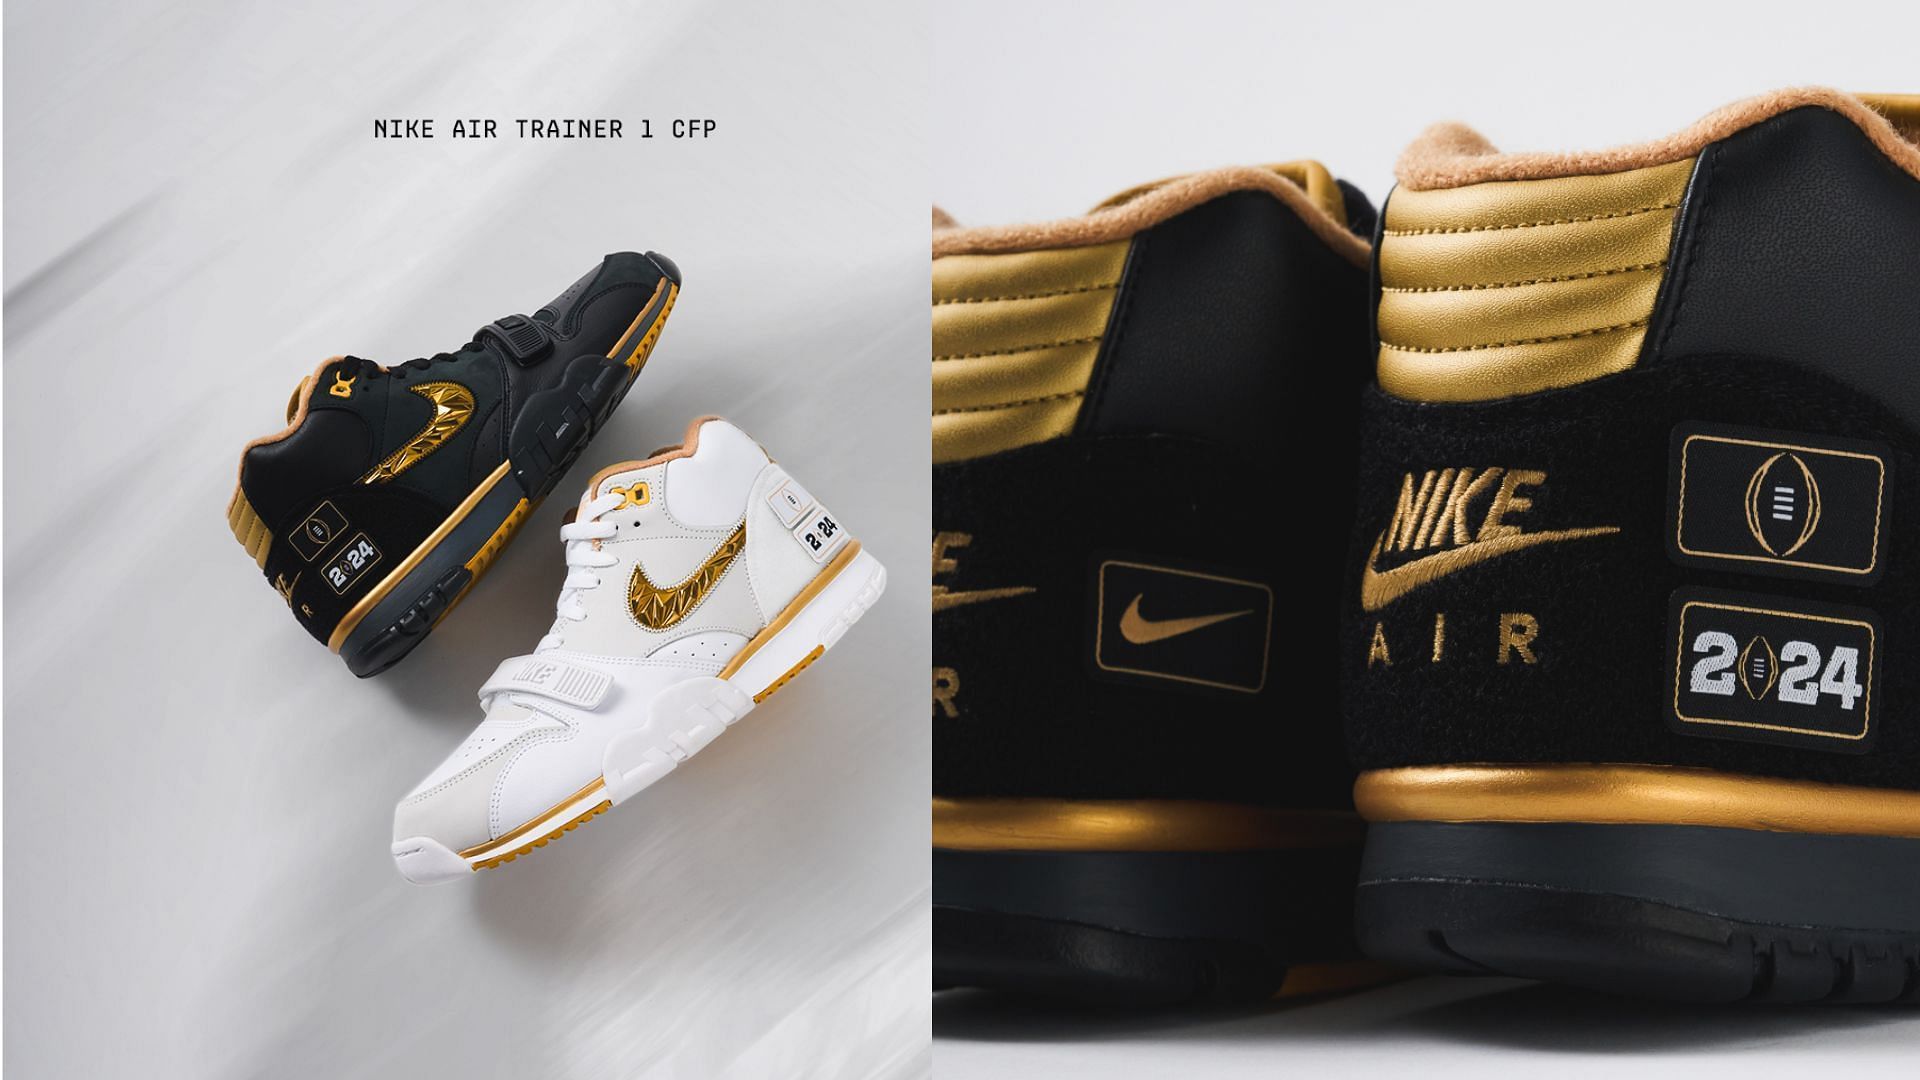 Nike Air Trainer 1 CFB playoff edition